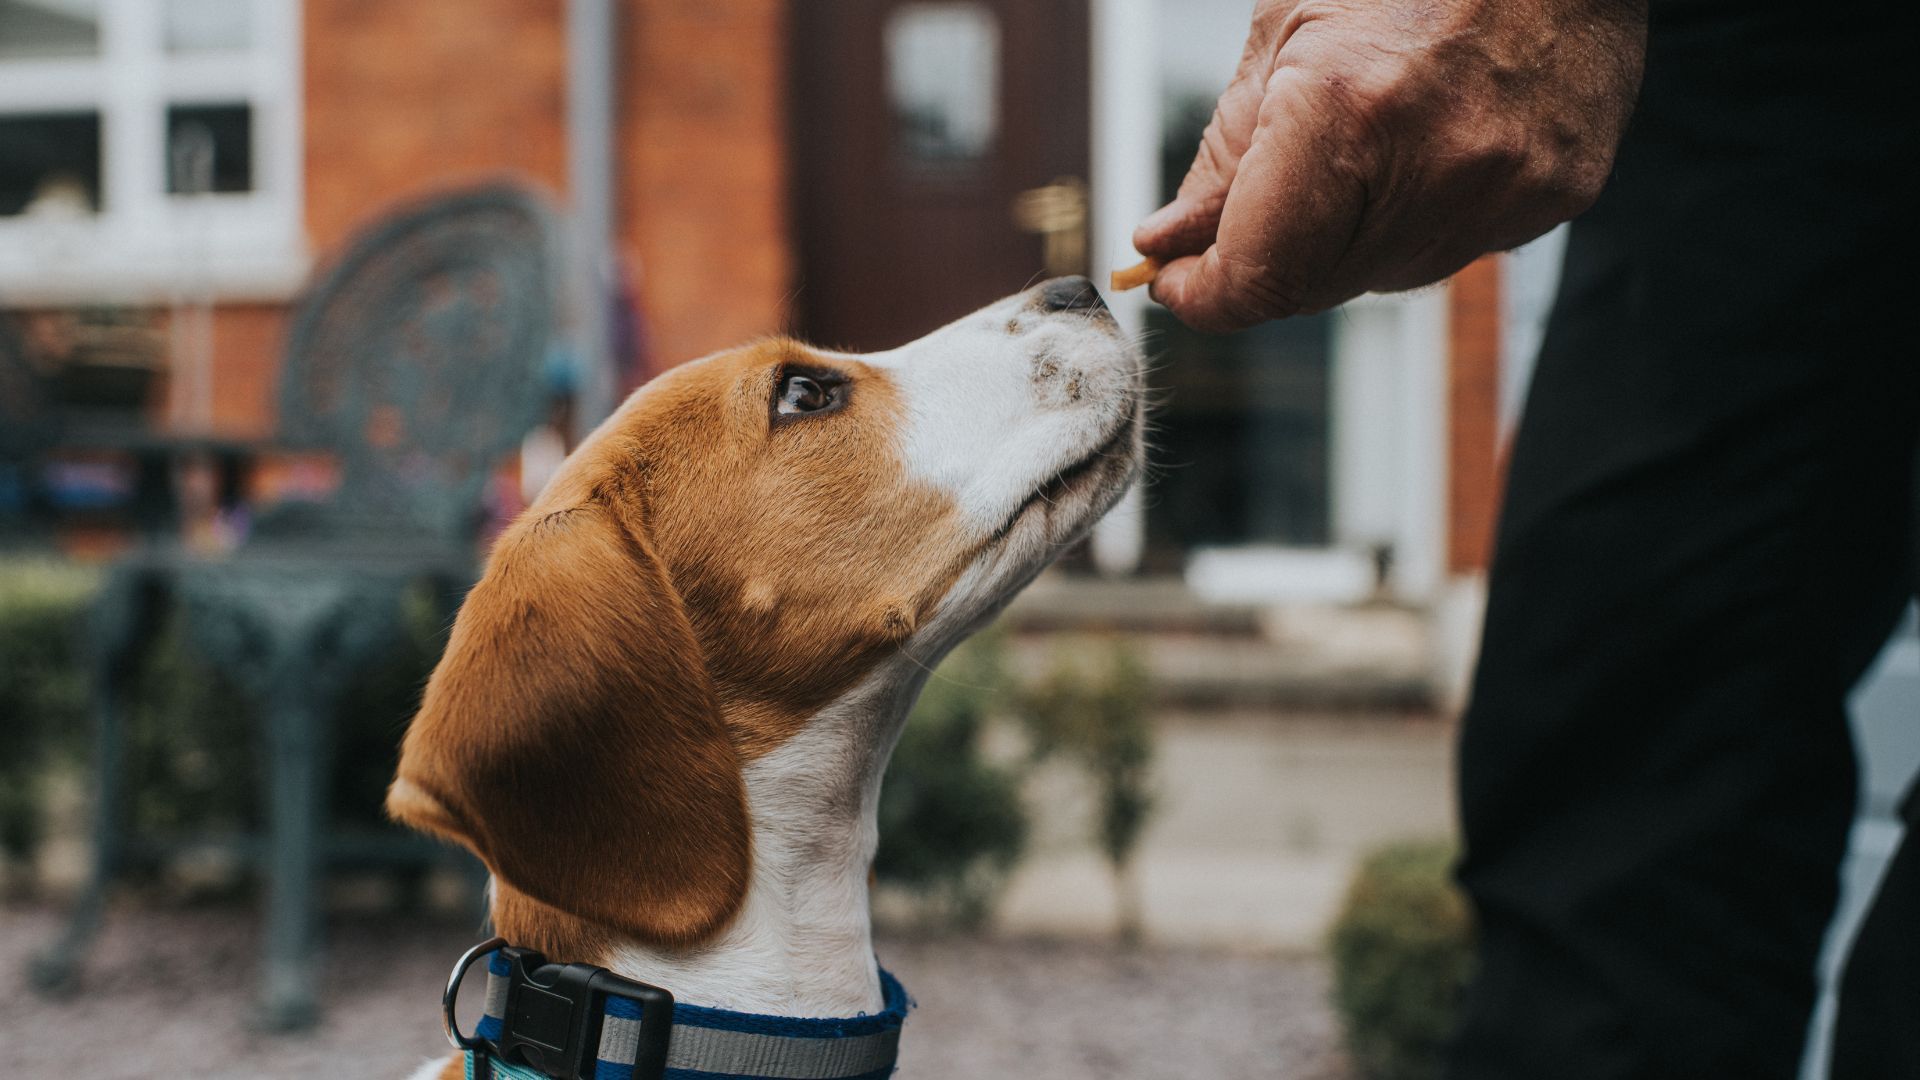 <p>                     Easy does it! Your dog might not necessarily nail their training the first, second, third or 30th time. But try breaking down positive behaviors and taking the small wins as they come. For example, if you’re training your dog to ‘come’ remember to reward even if they take one step forward.                    </p>